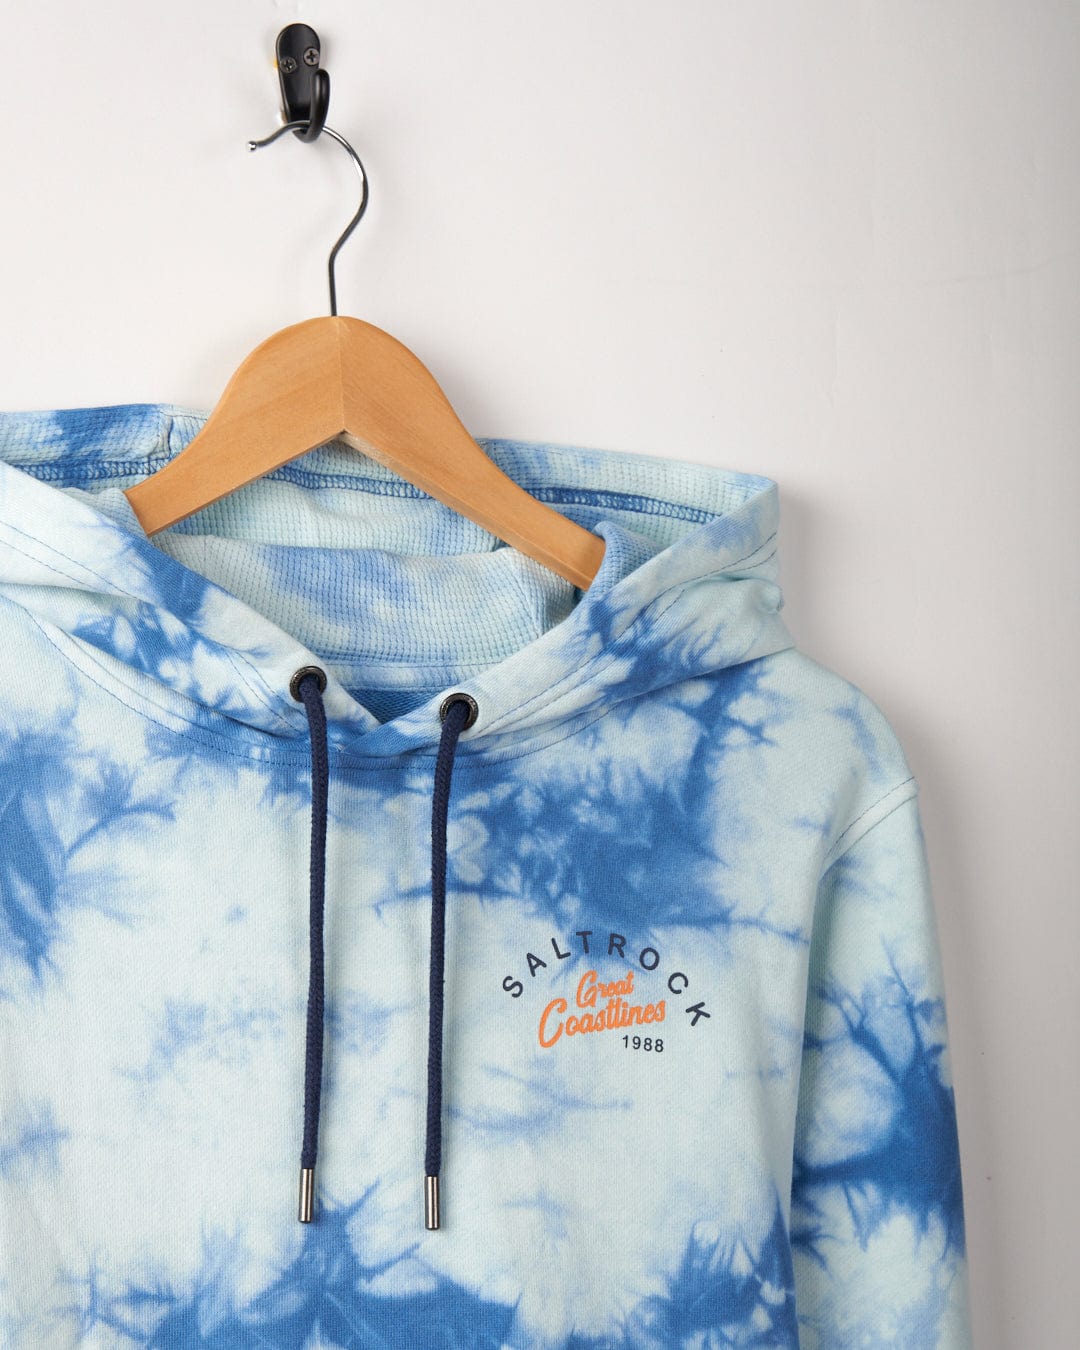 A Coastline - Mens Tie Dye Pop Hoodie - Blue made from 100% cotton with the logo "Saltrock Life" and text "1988 Coastlines," hanging on a wooden hanger against a white wall.